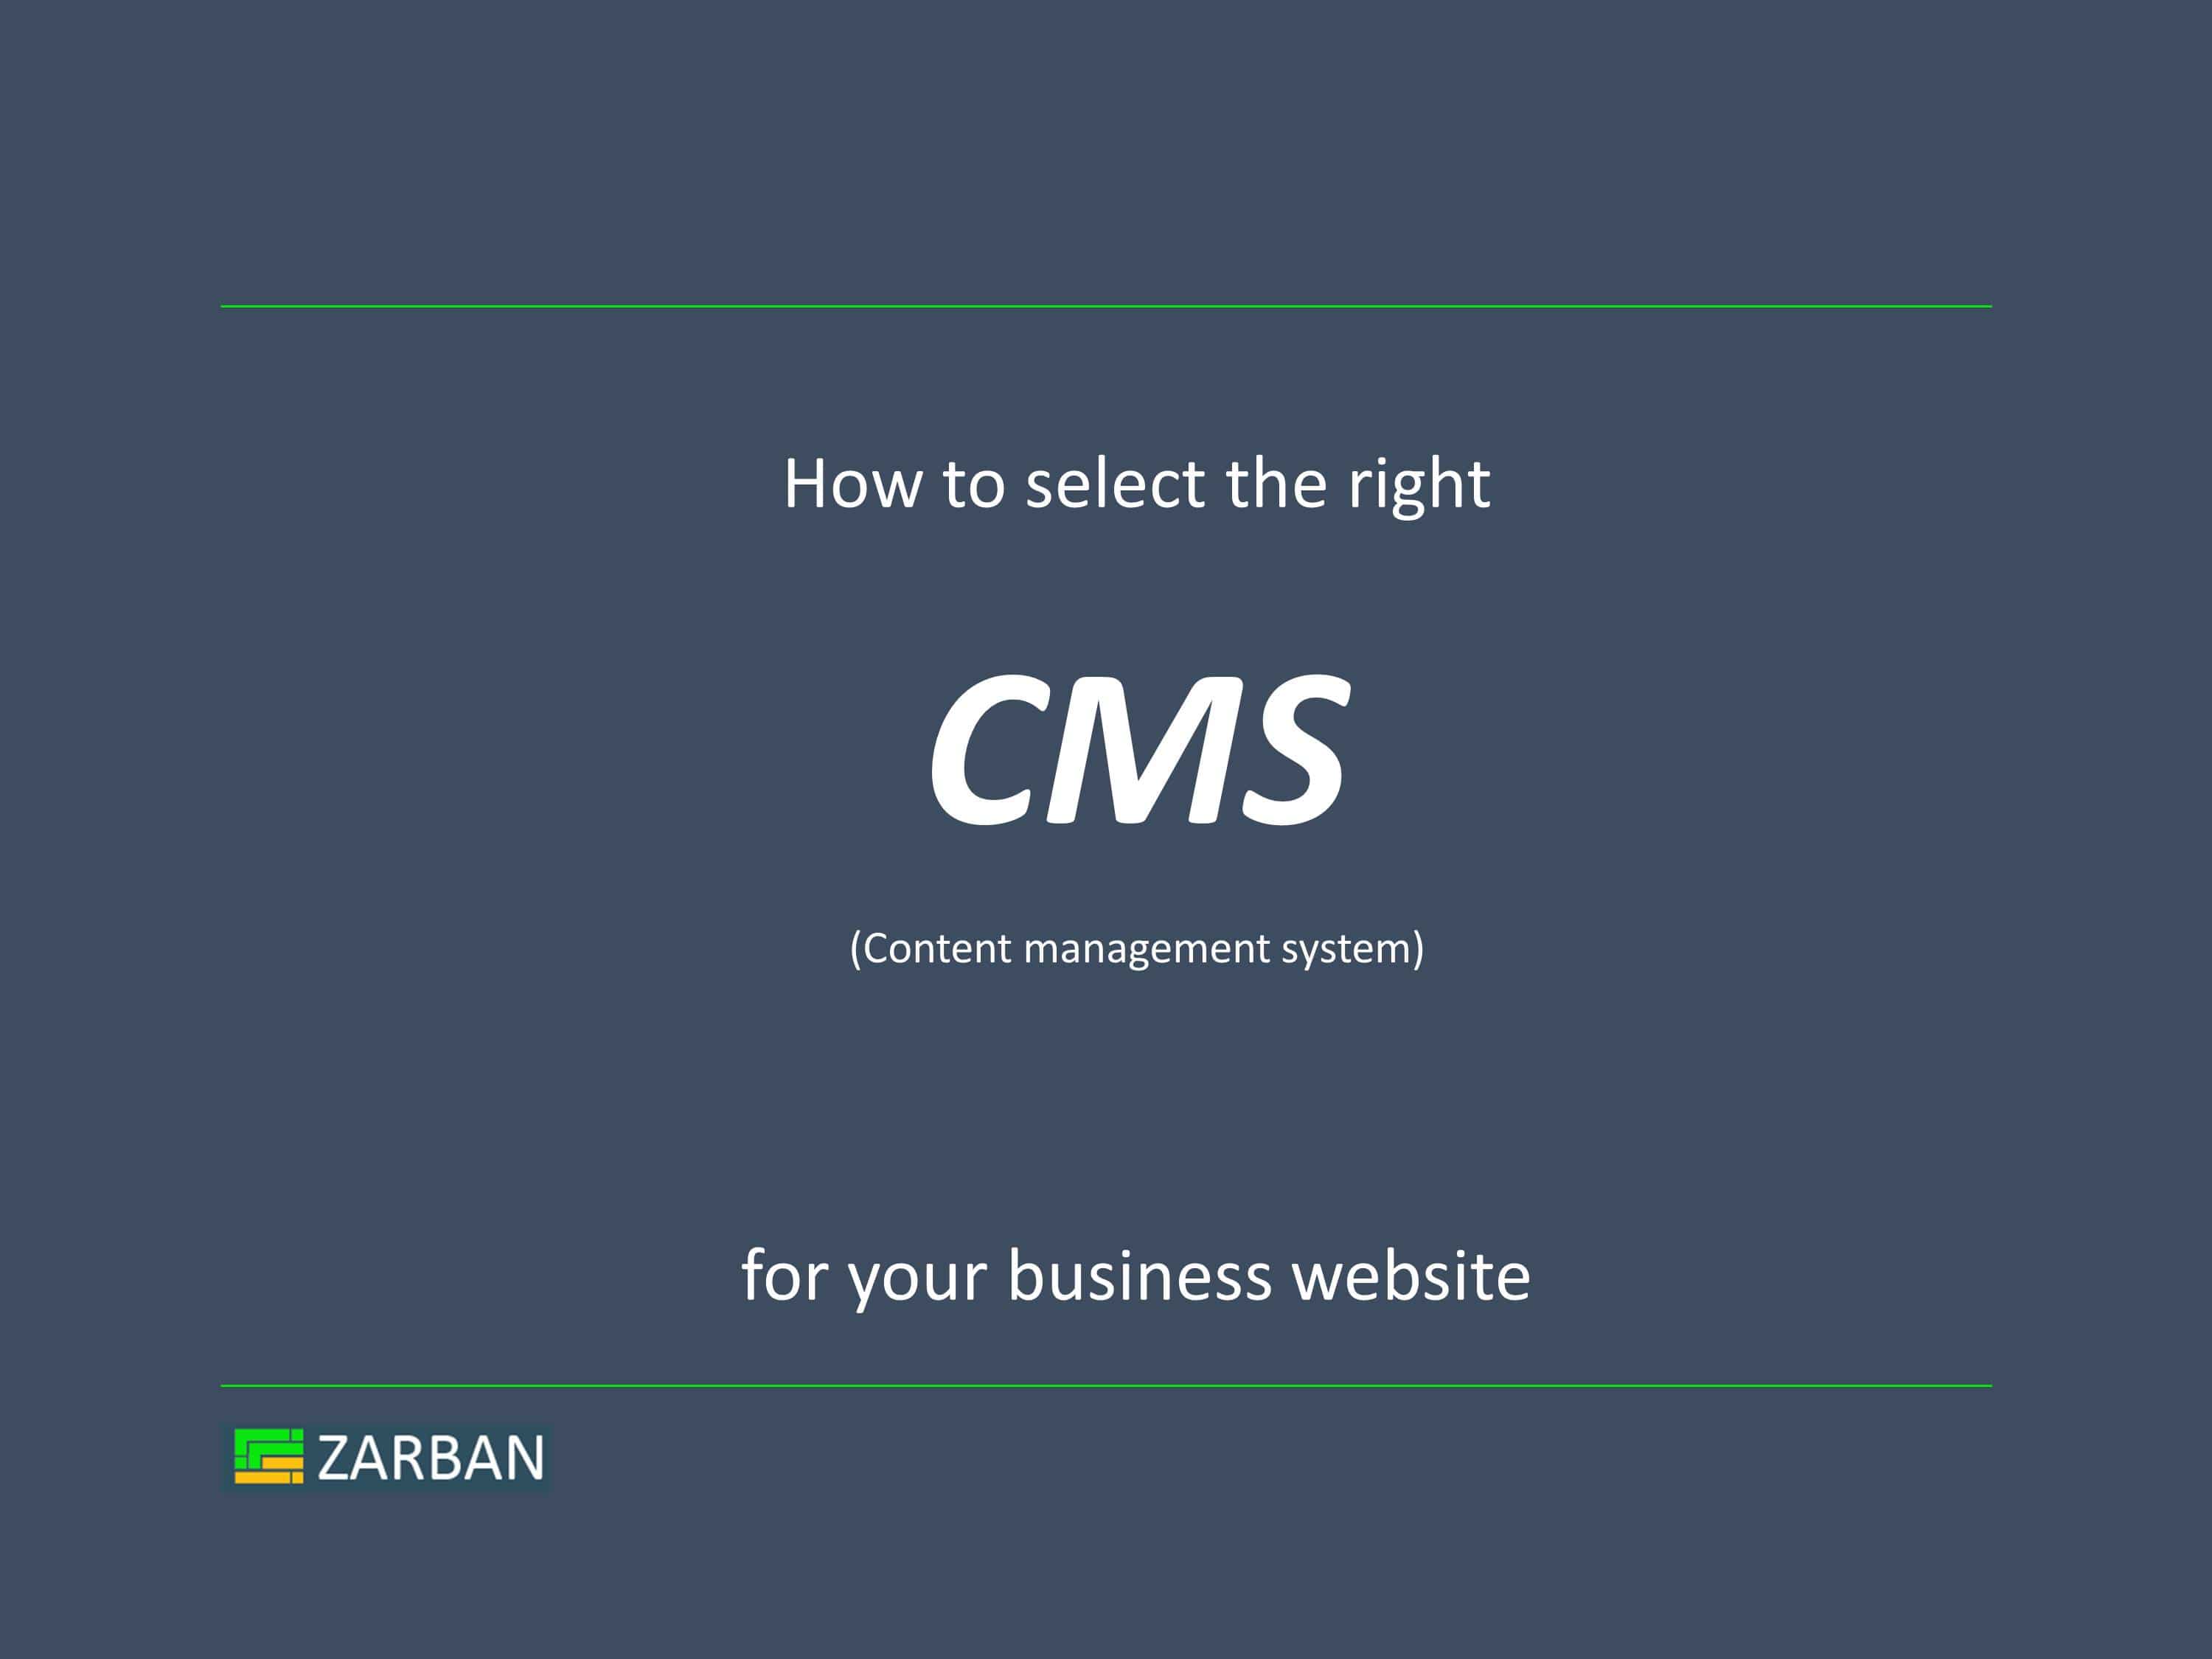 How to select a CMS for your business website